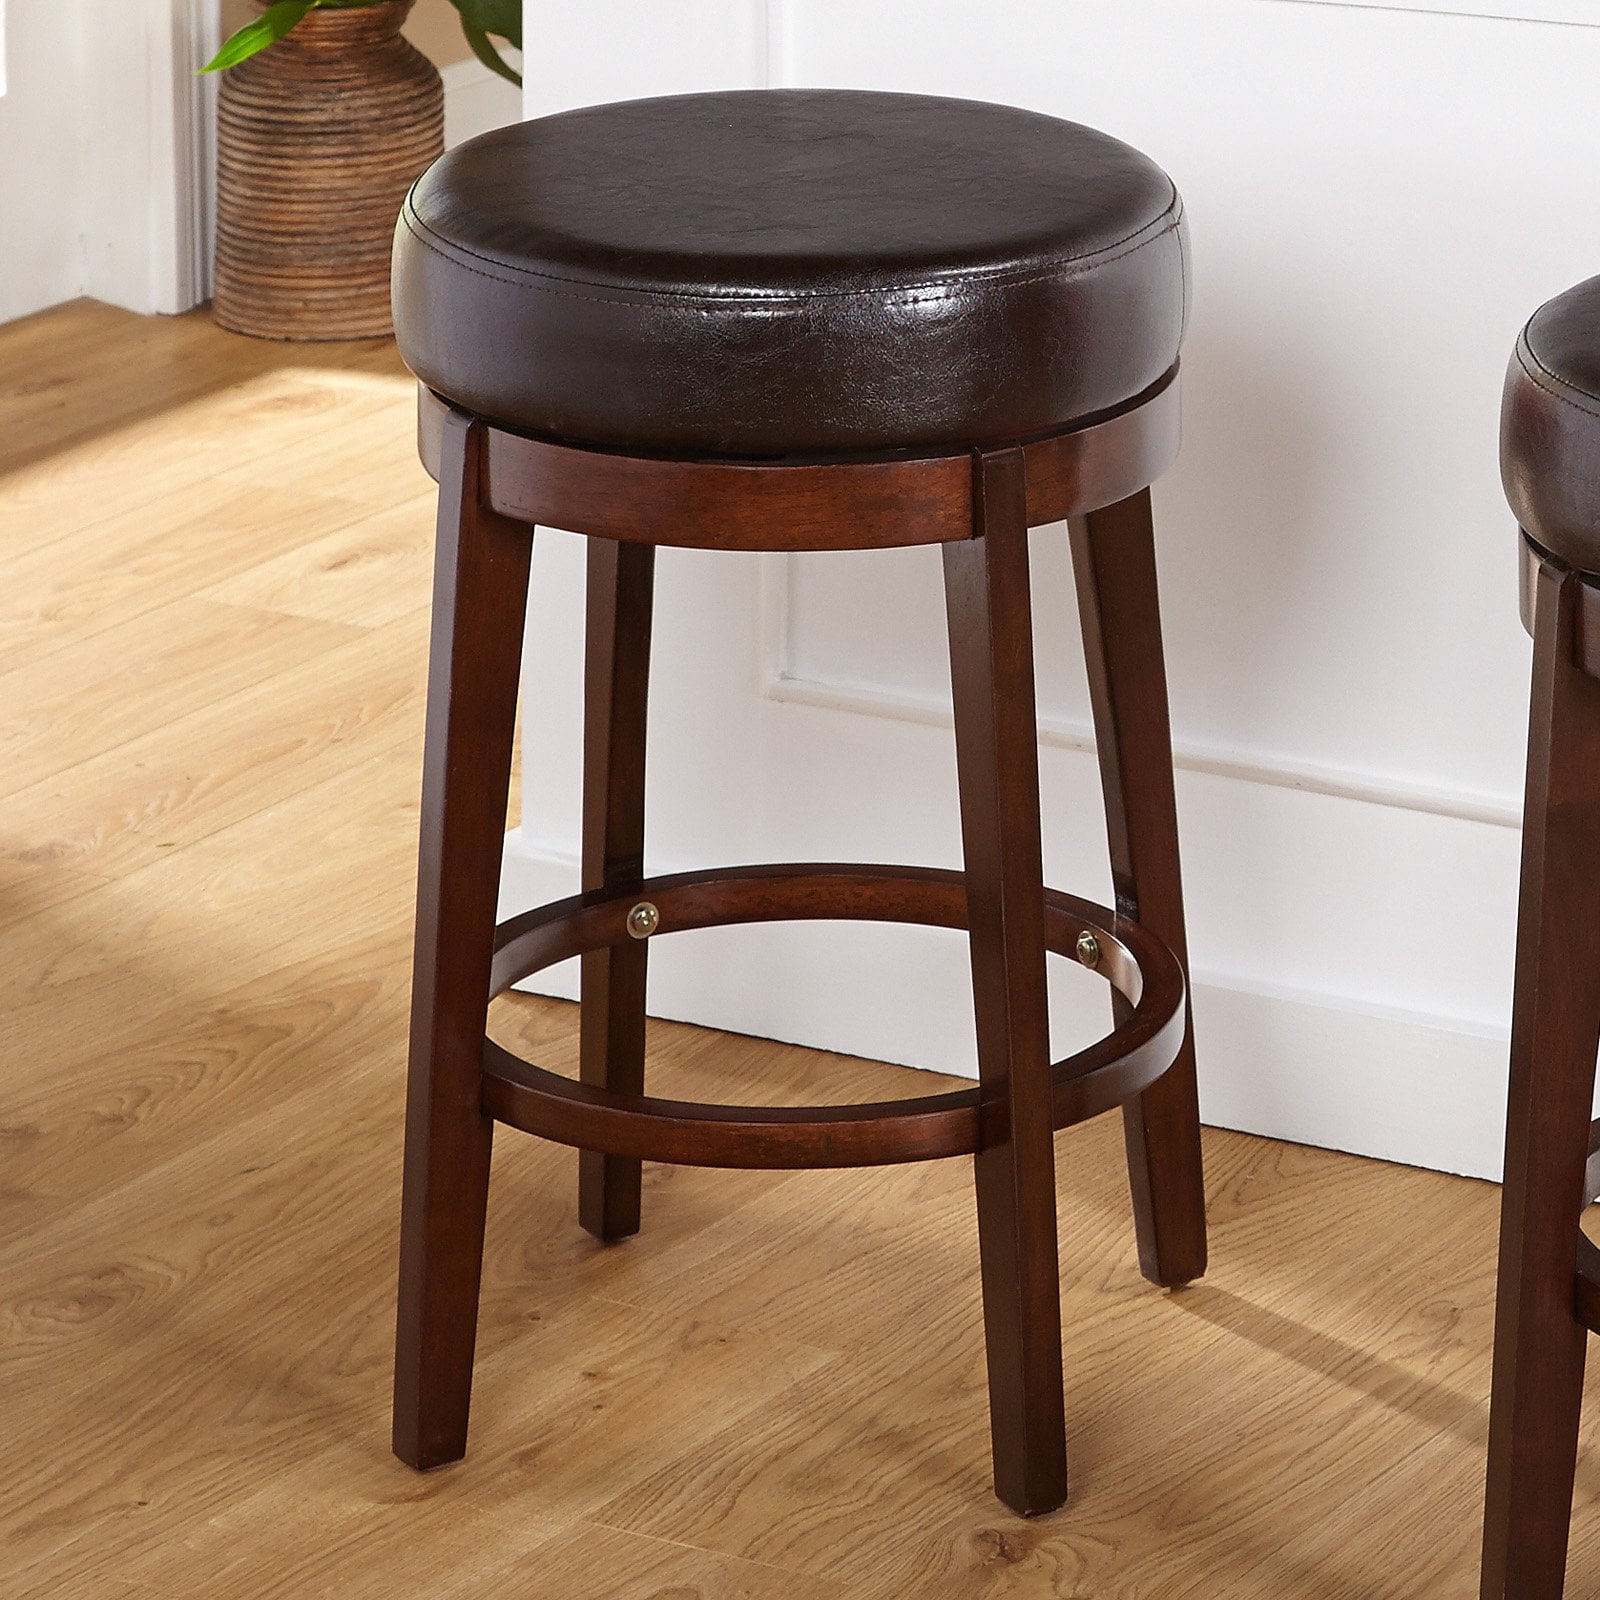 Single Avenue Swivel Counter Height, Bar Stools 24 Inches High Swivel